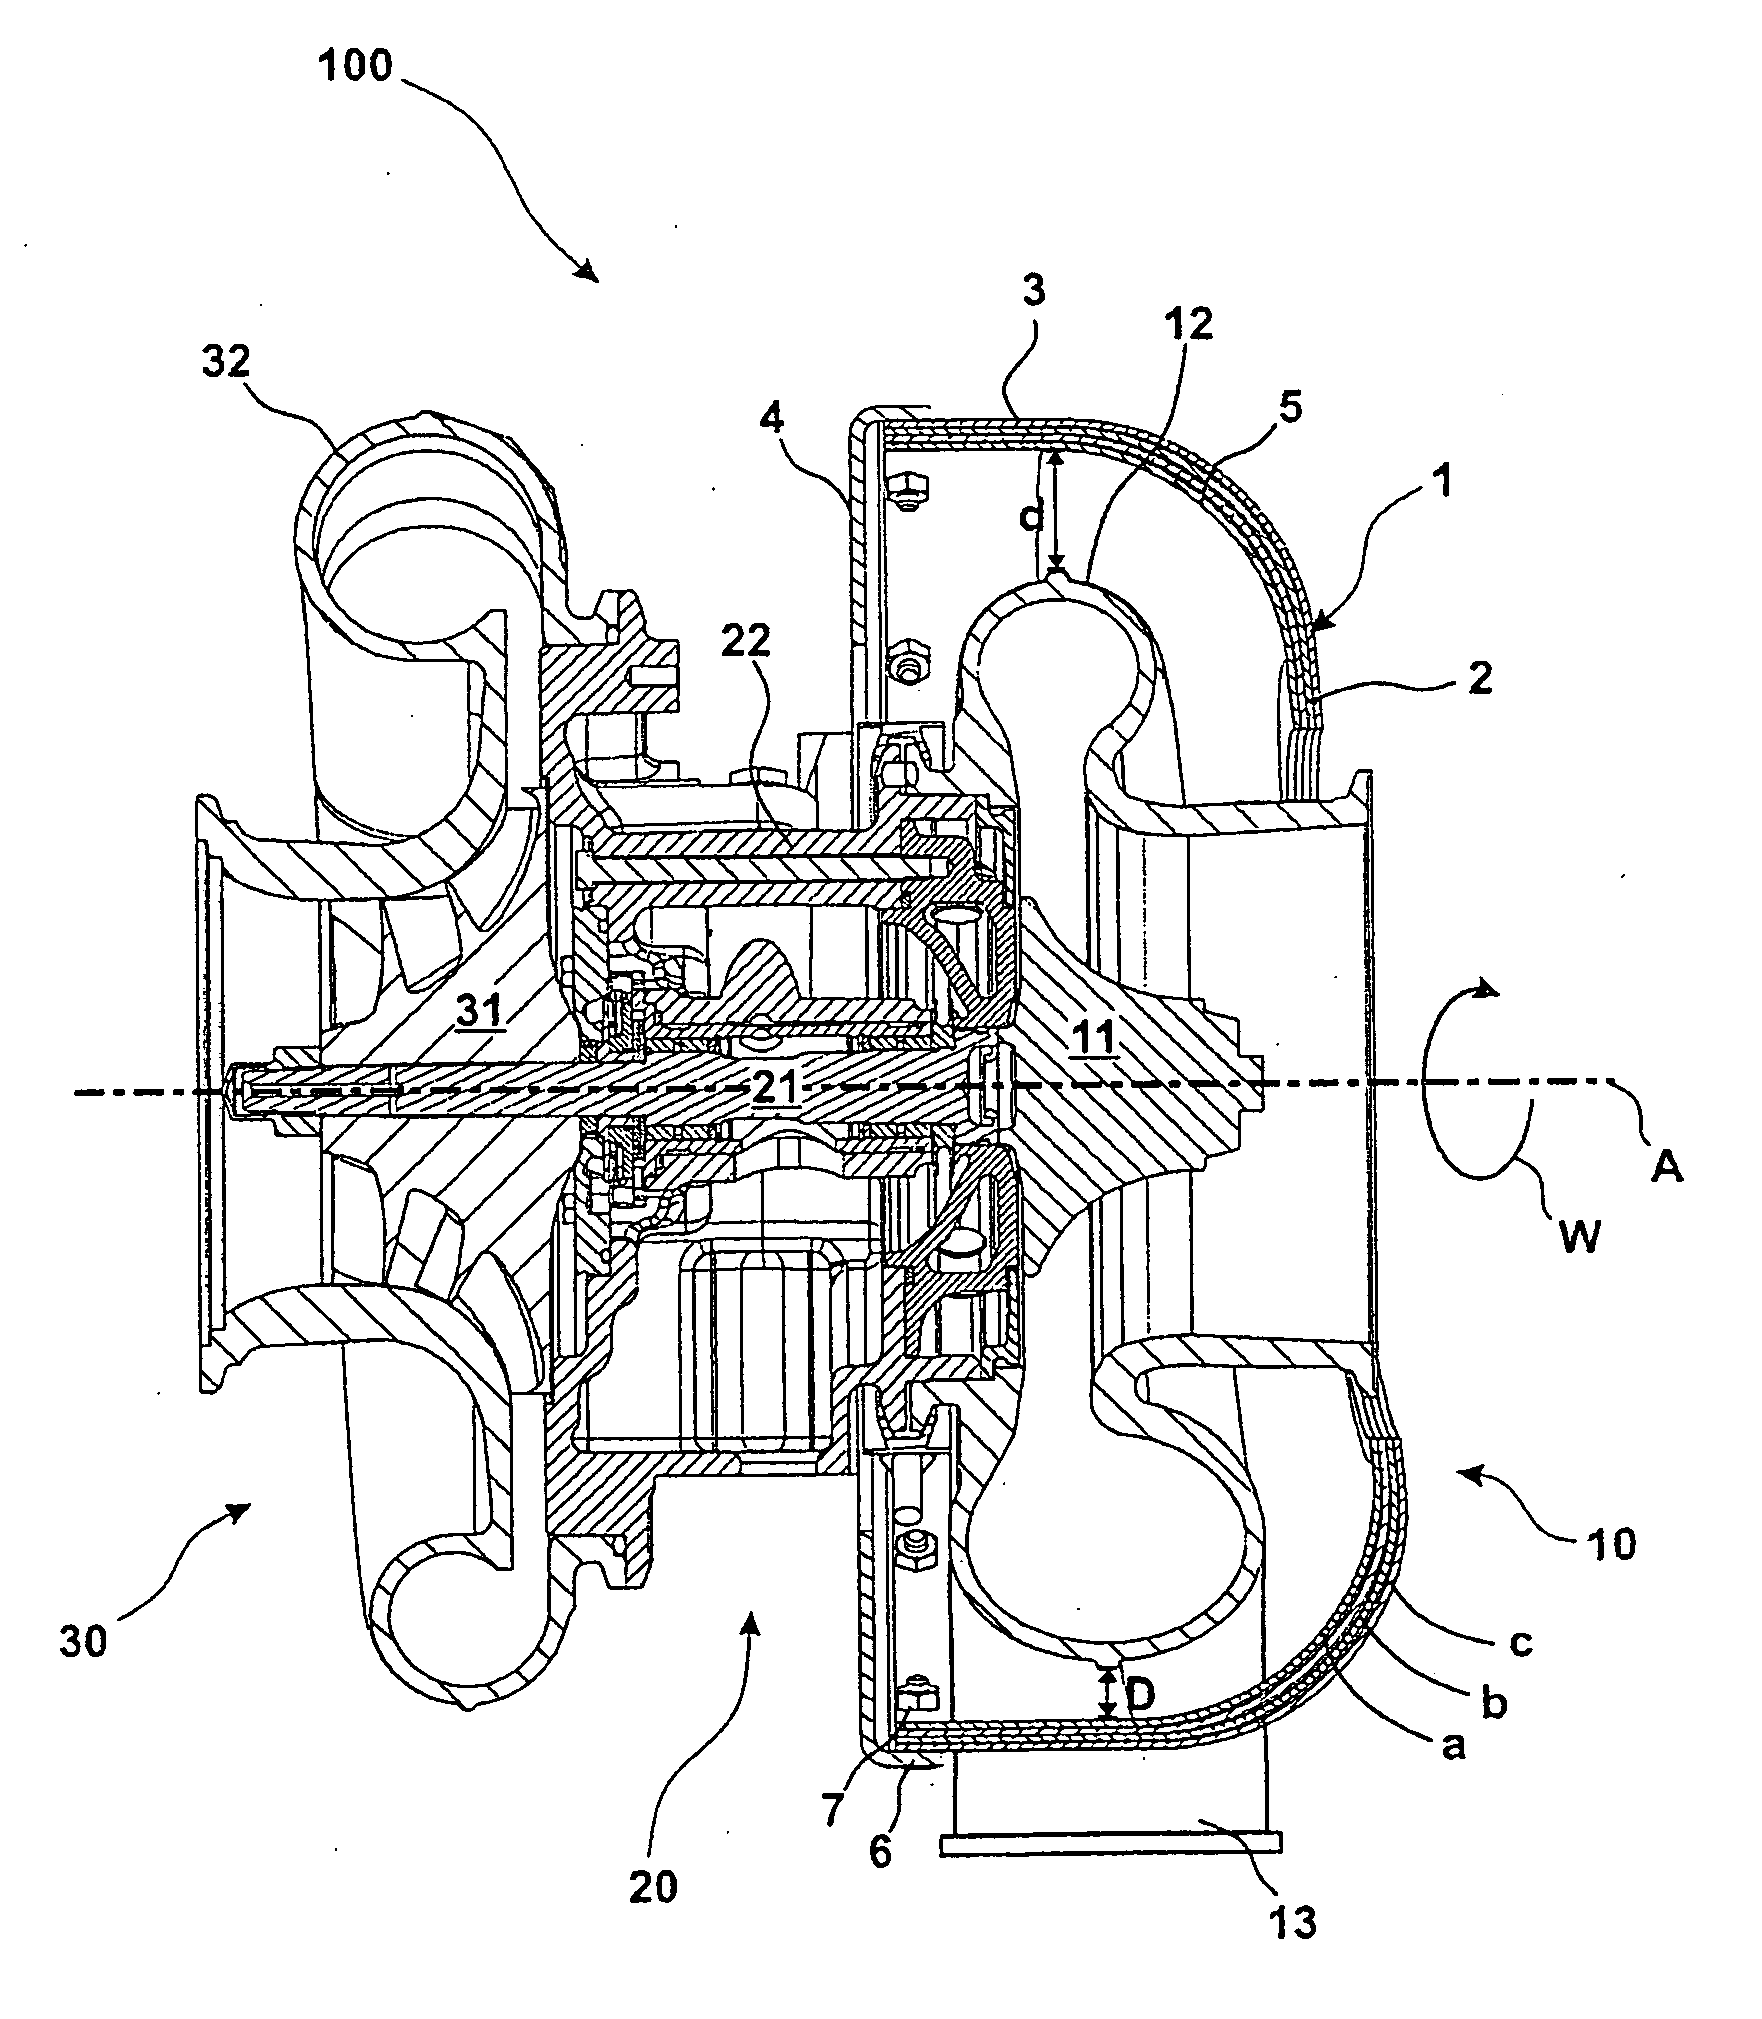 Explosion protection for a turbine and combustion engine